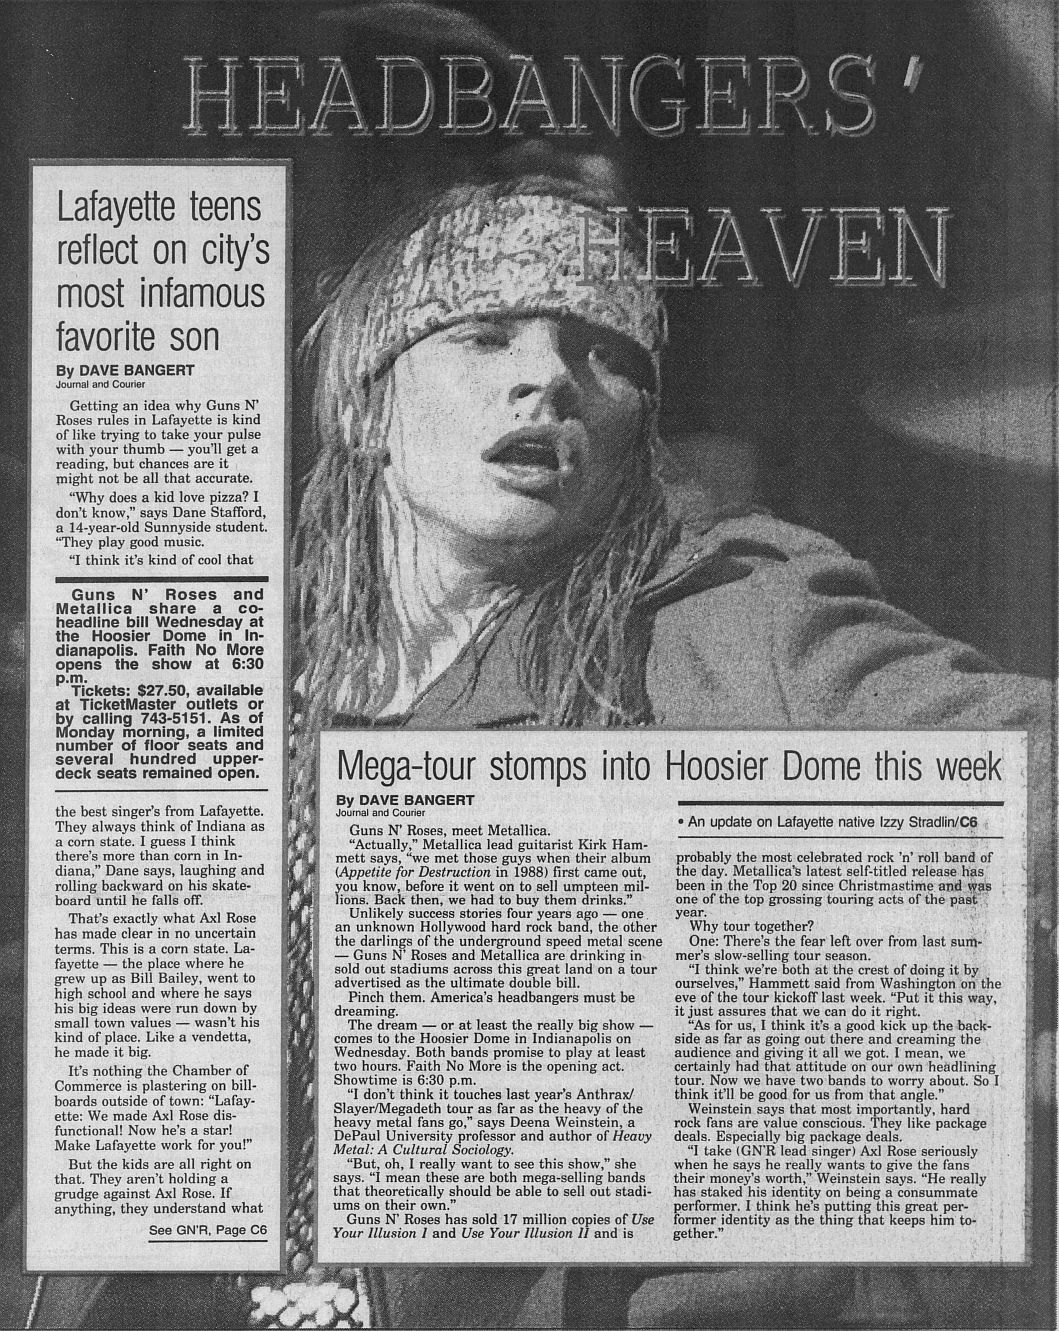 1992.07.21 - Journal and Courier - Lafayette teens reflect on city’s most infamous favorite son Coe9OH55_o